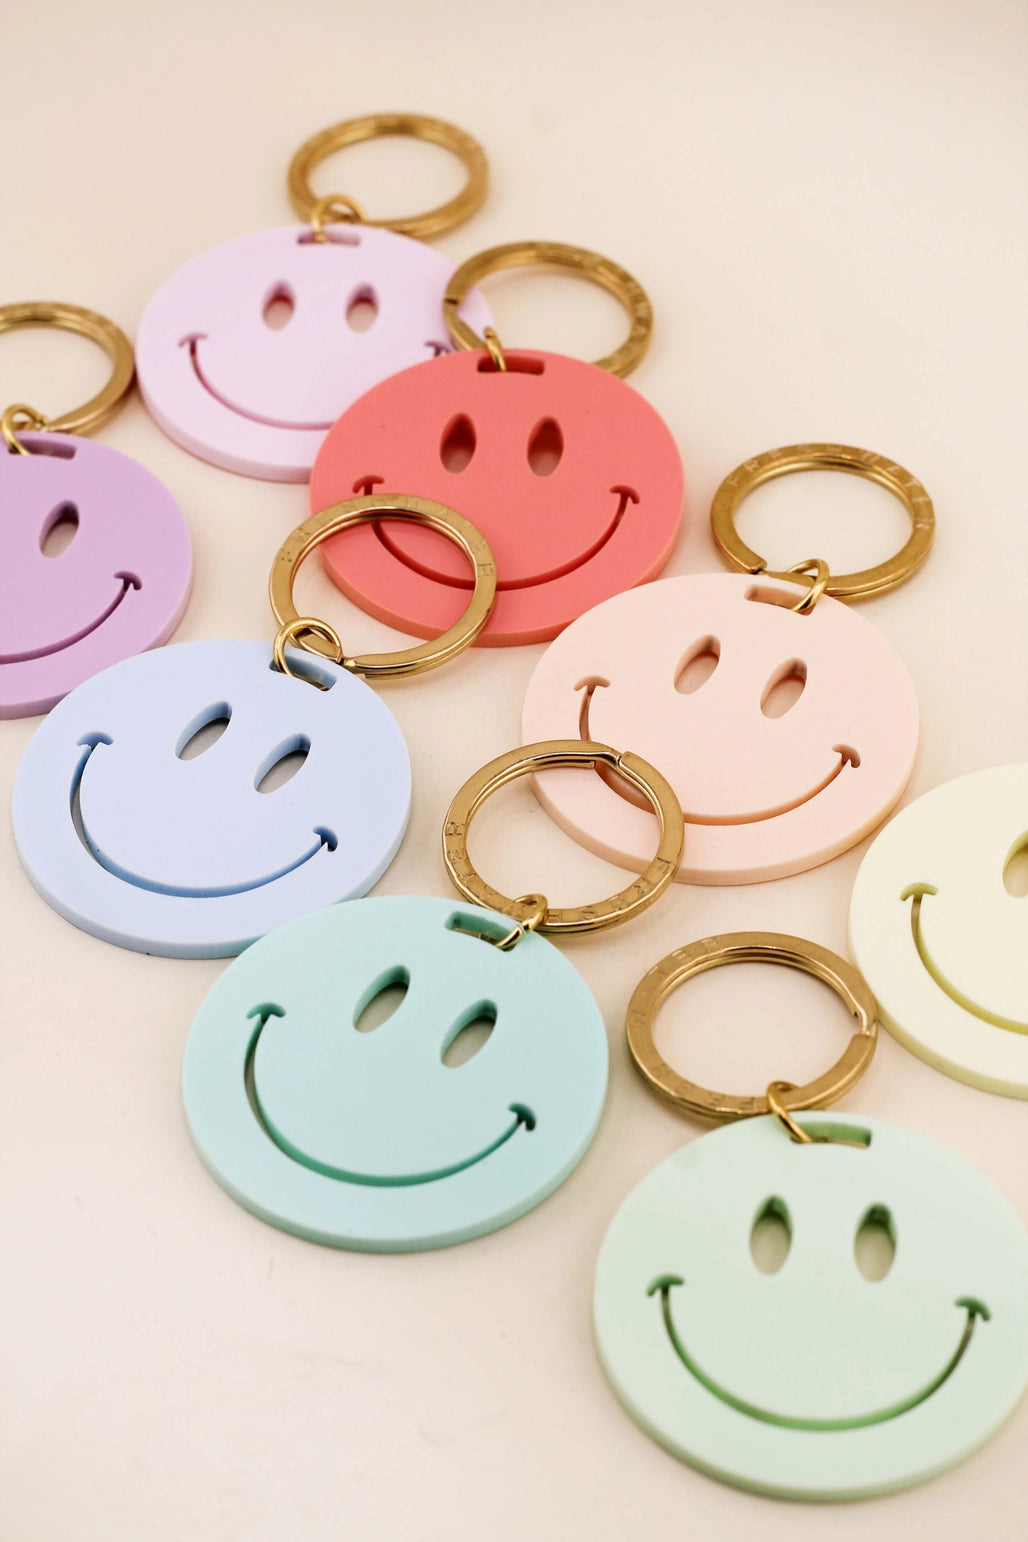 Various Colors of Smiley Keychains